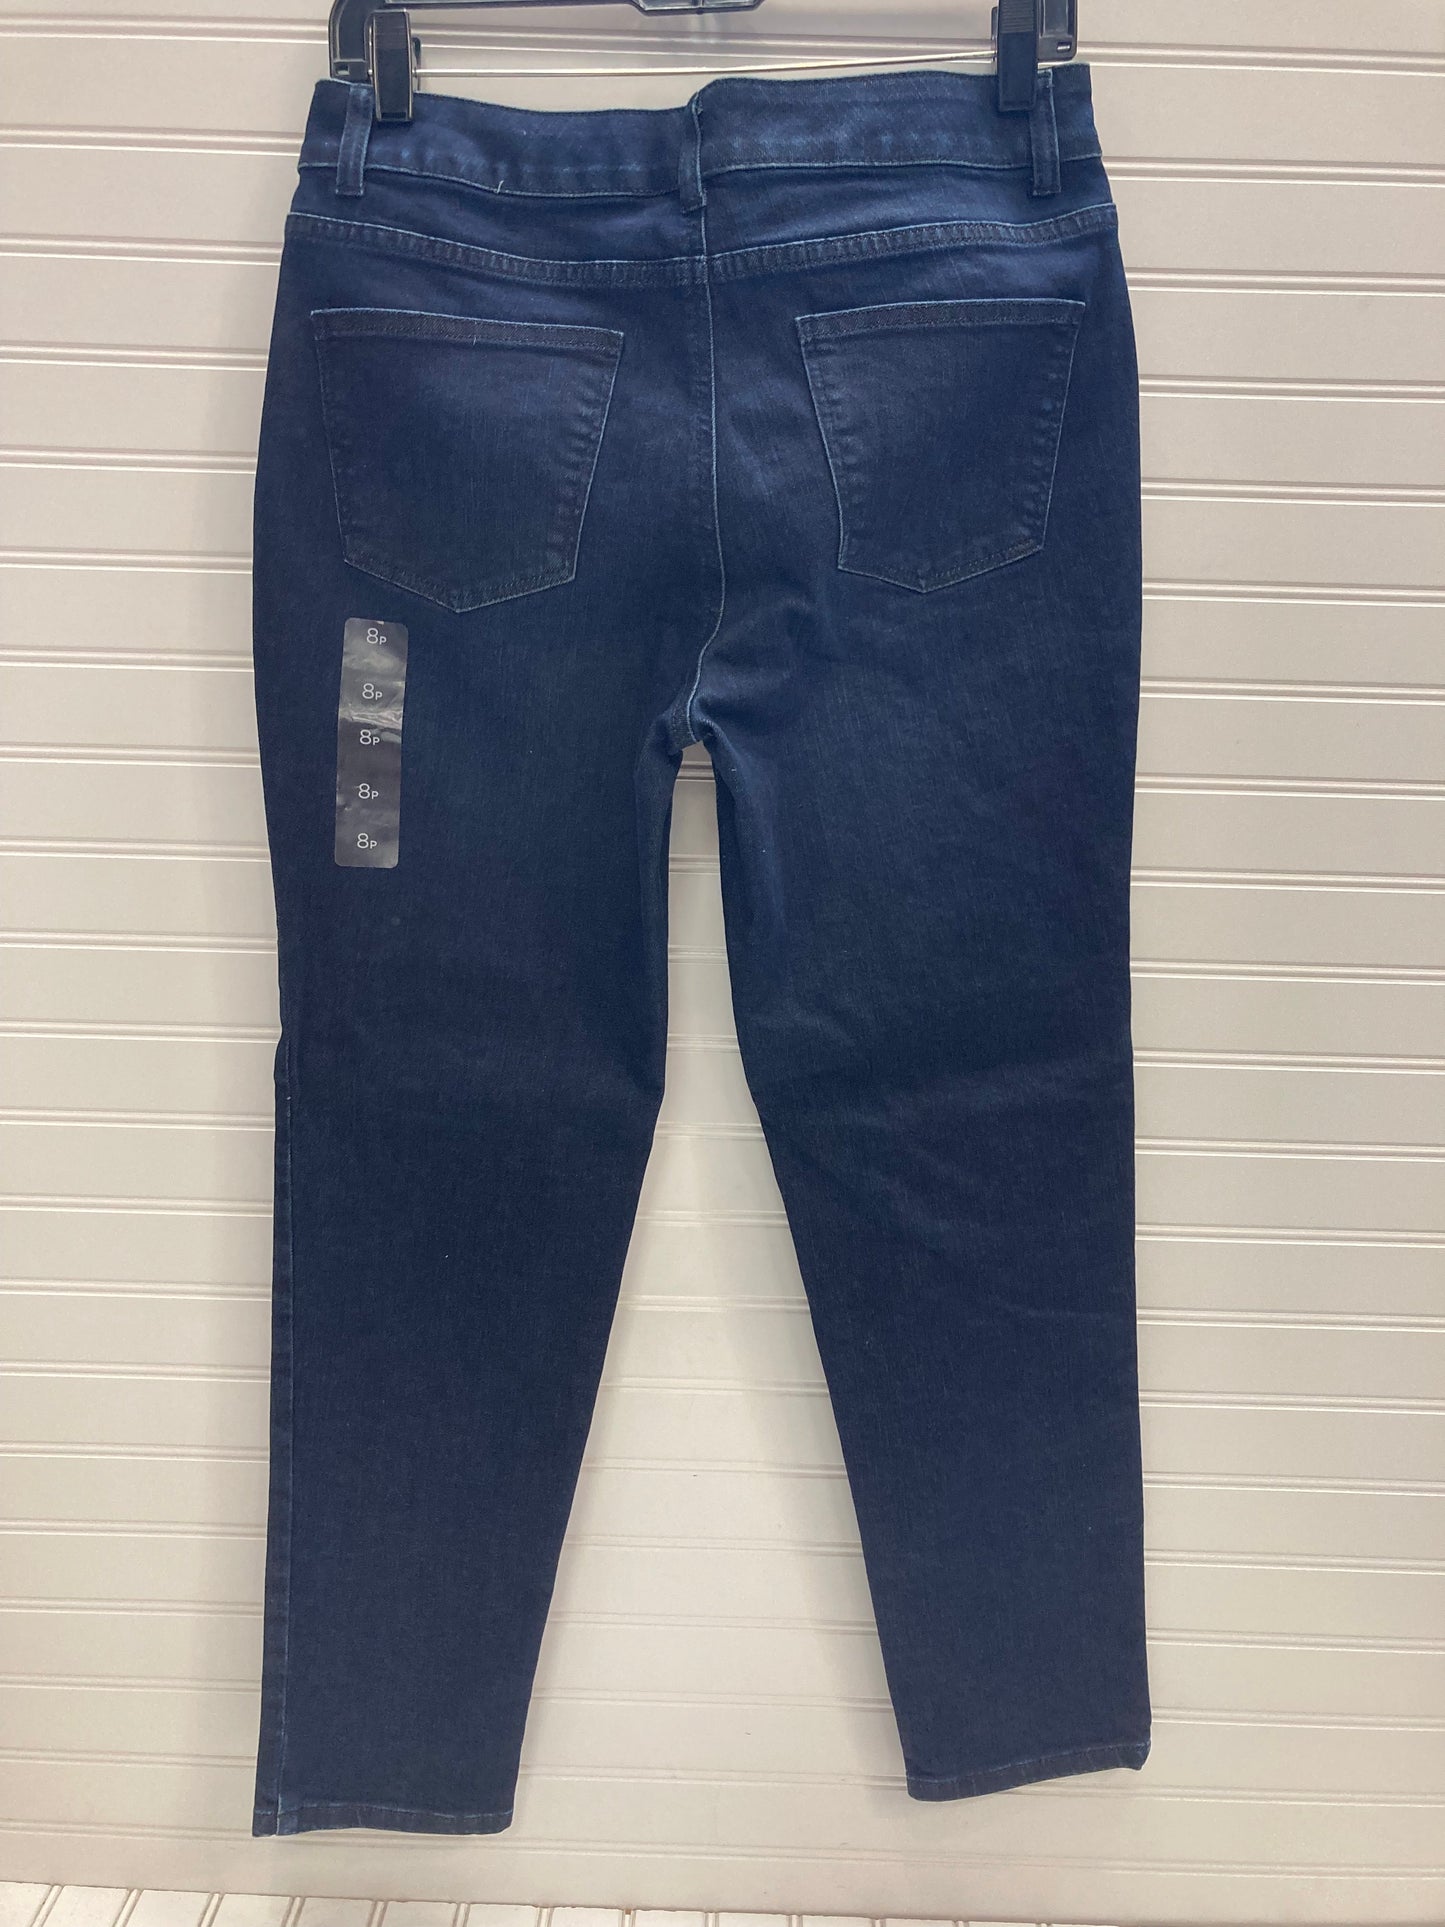 Jeans Straight By Talbots  Size: 8petite